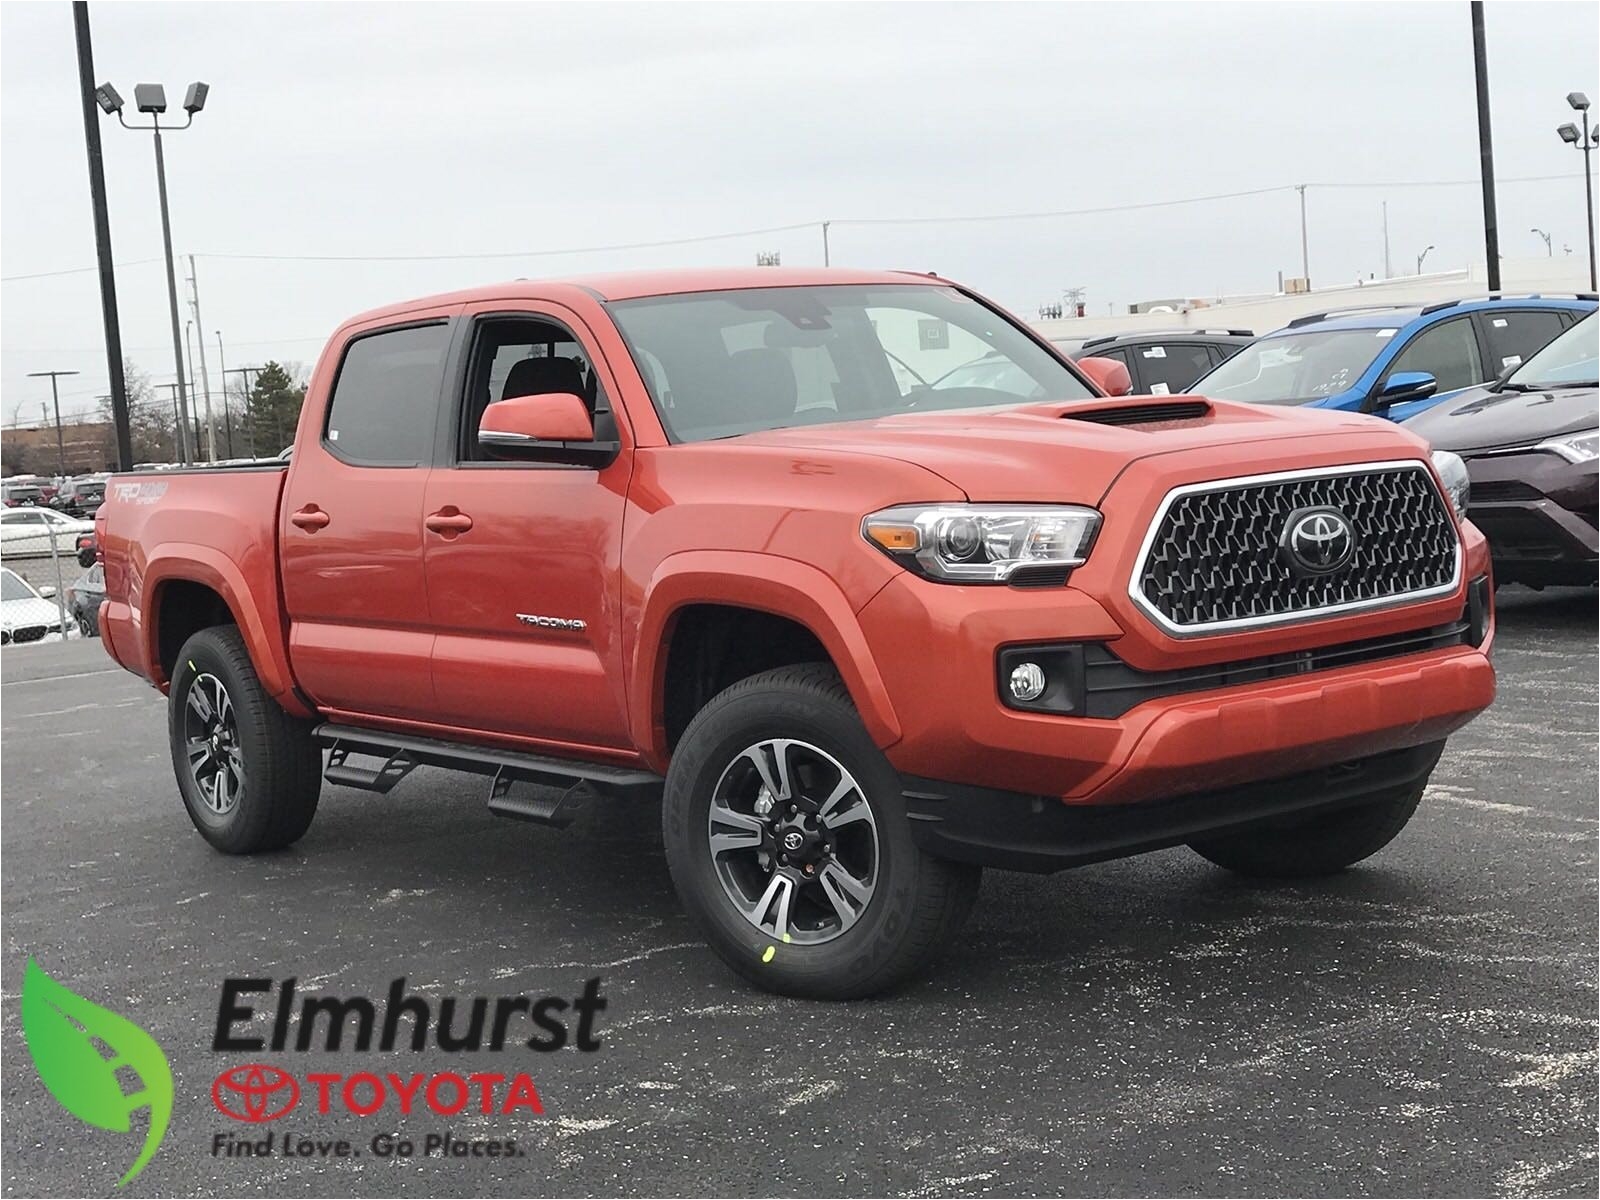 2003 toyota Tacoma Double Cab Roof Rack New 2018 toyota Tacoma Trd Sport Double Cab Double Cab In Elmhurst